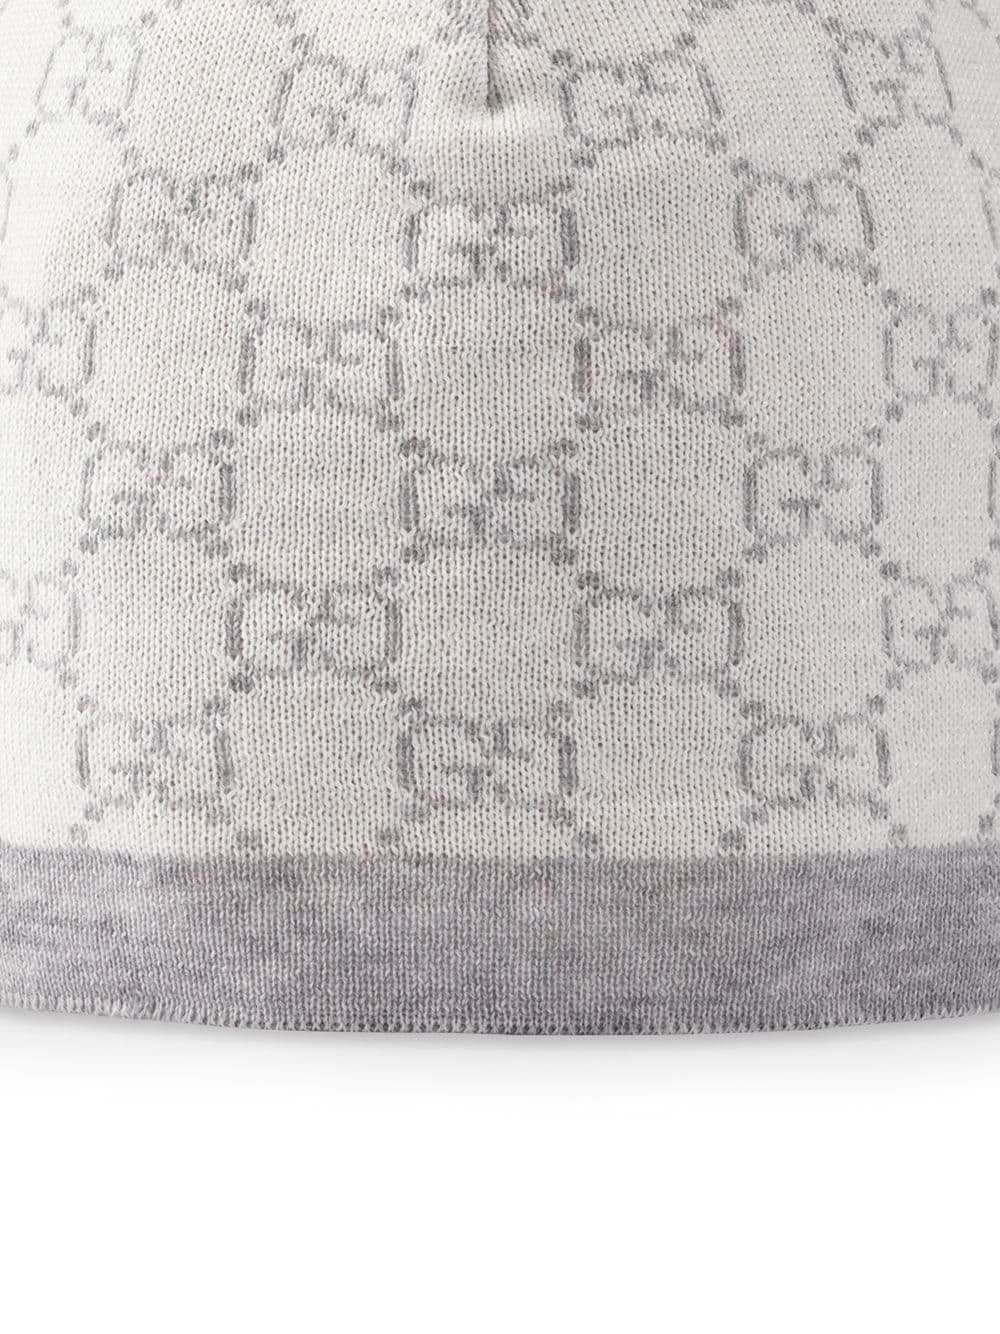 Ivory and gray hat for newborns